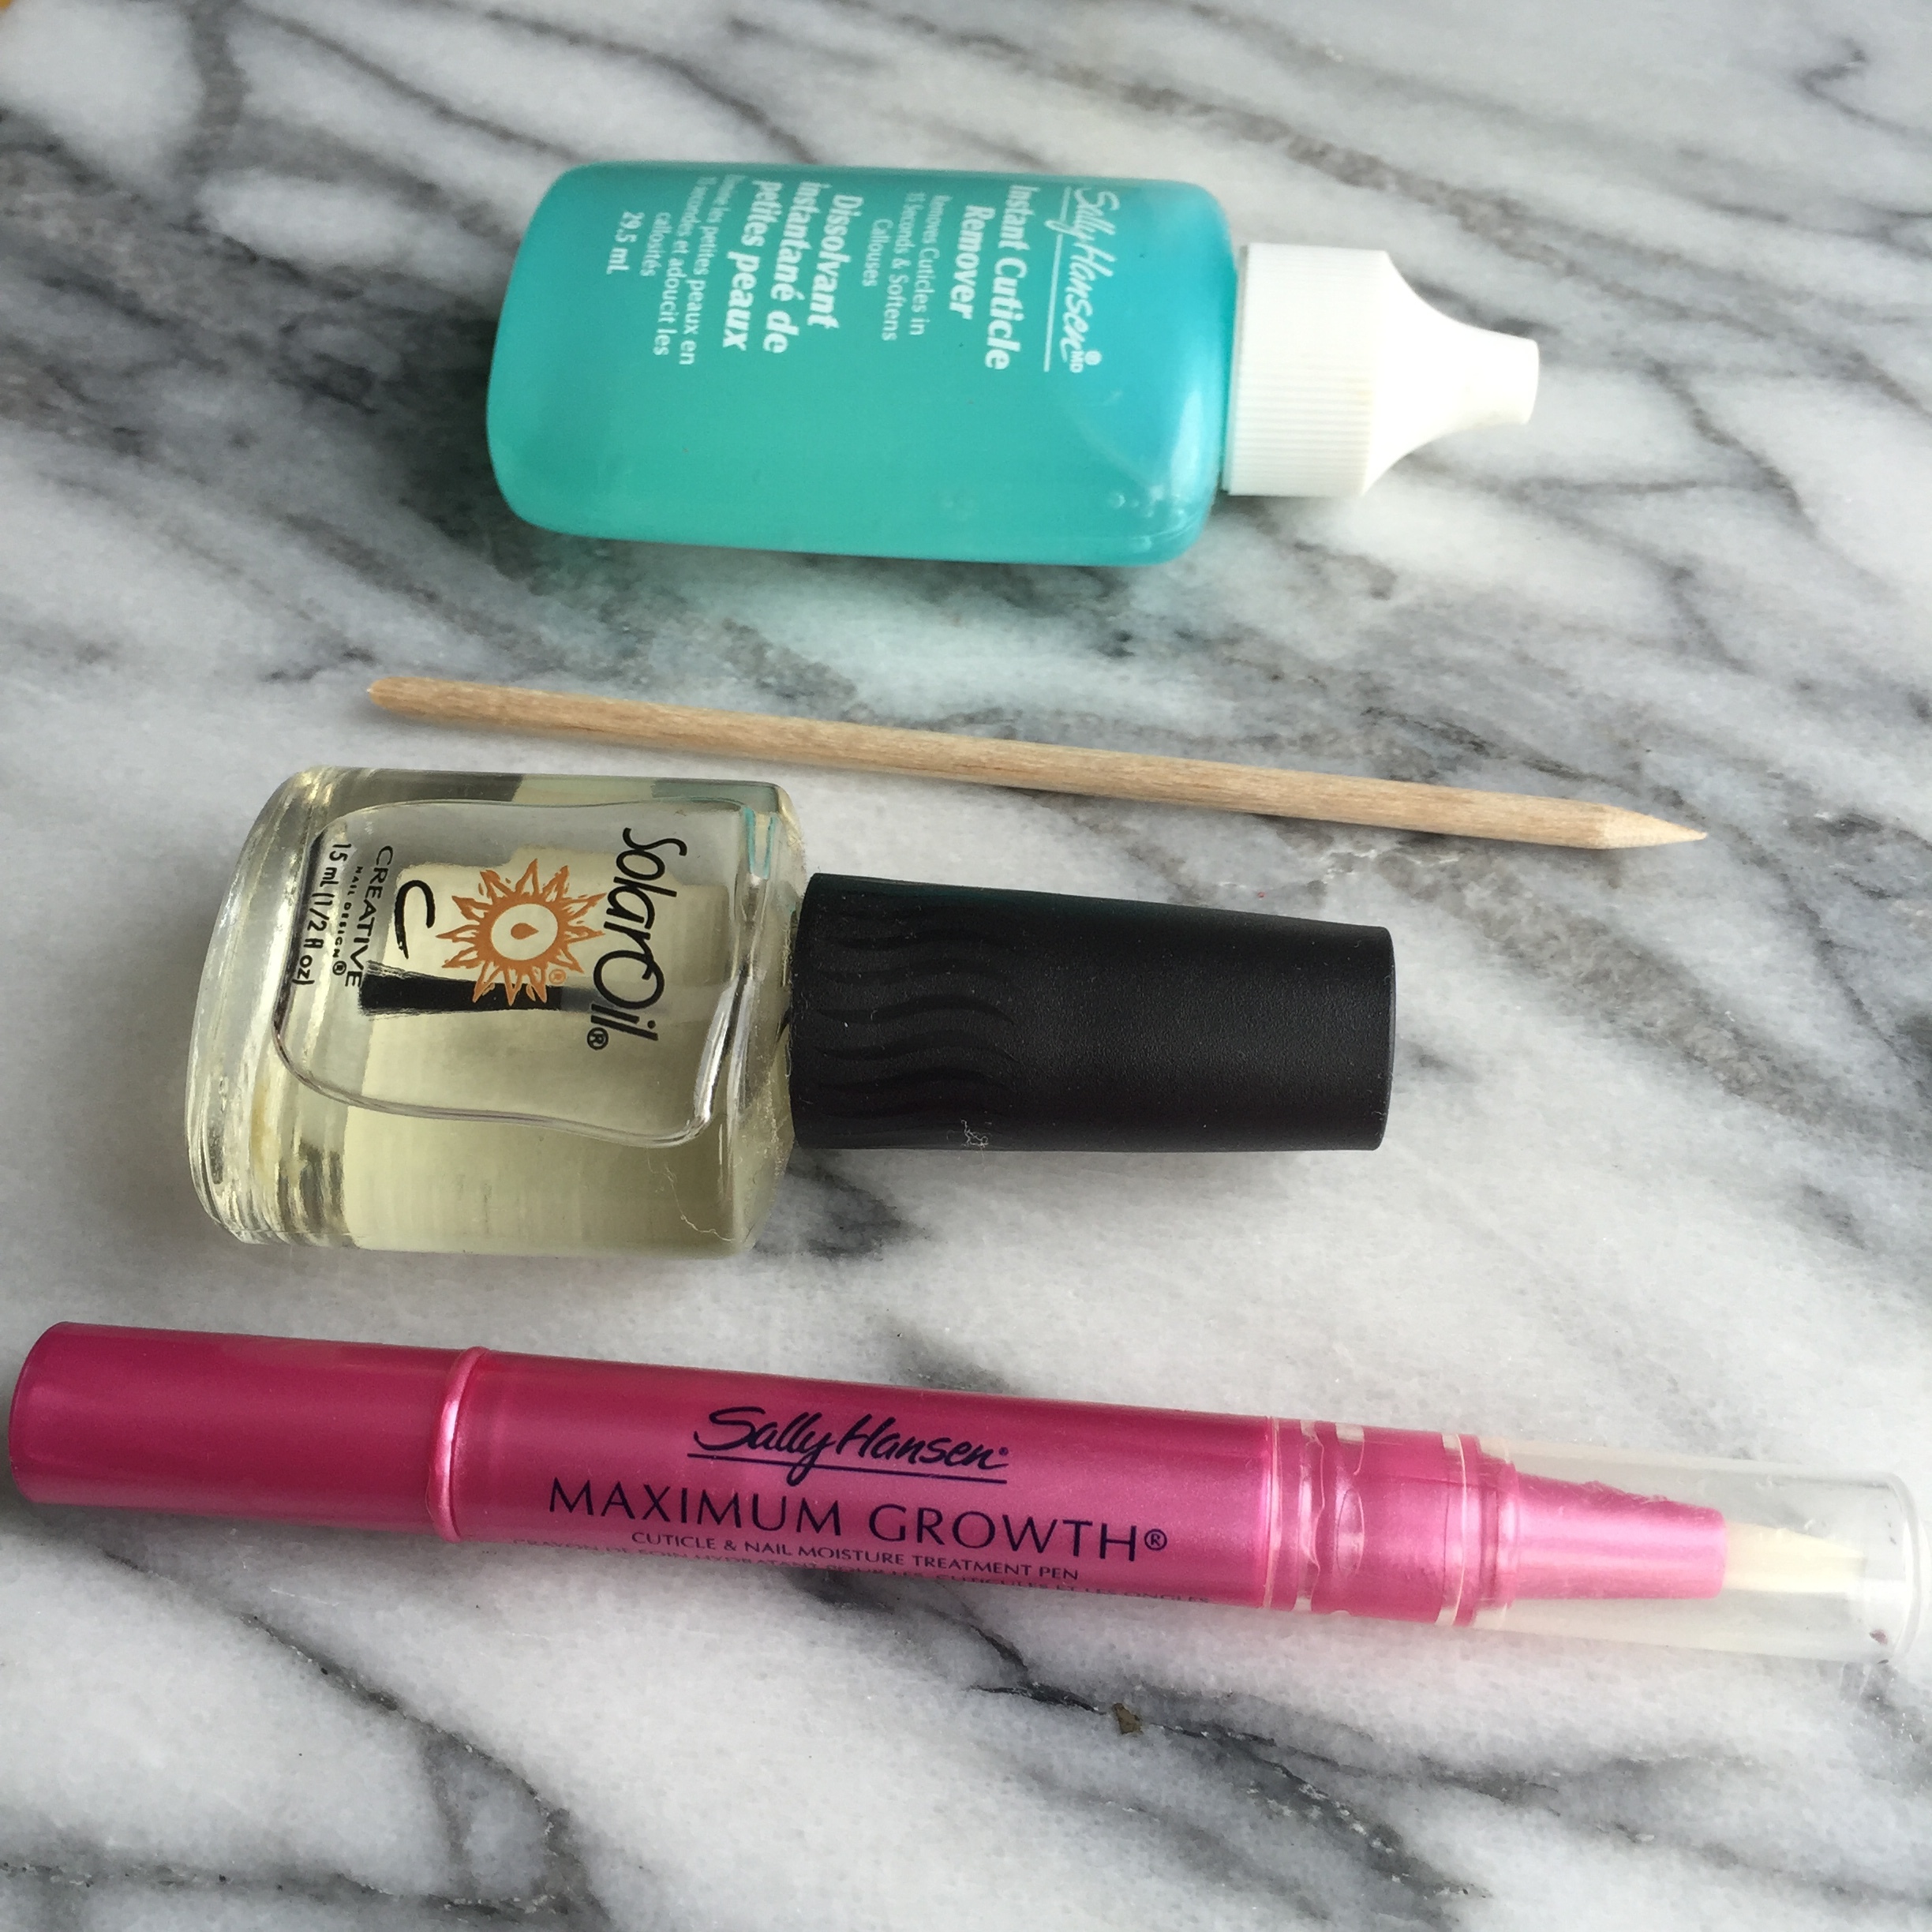 Caring for your nails: Cuticle Remover and Nail Oil